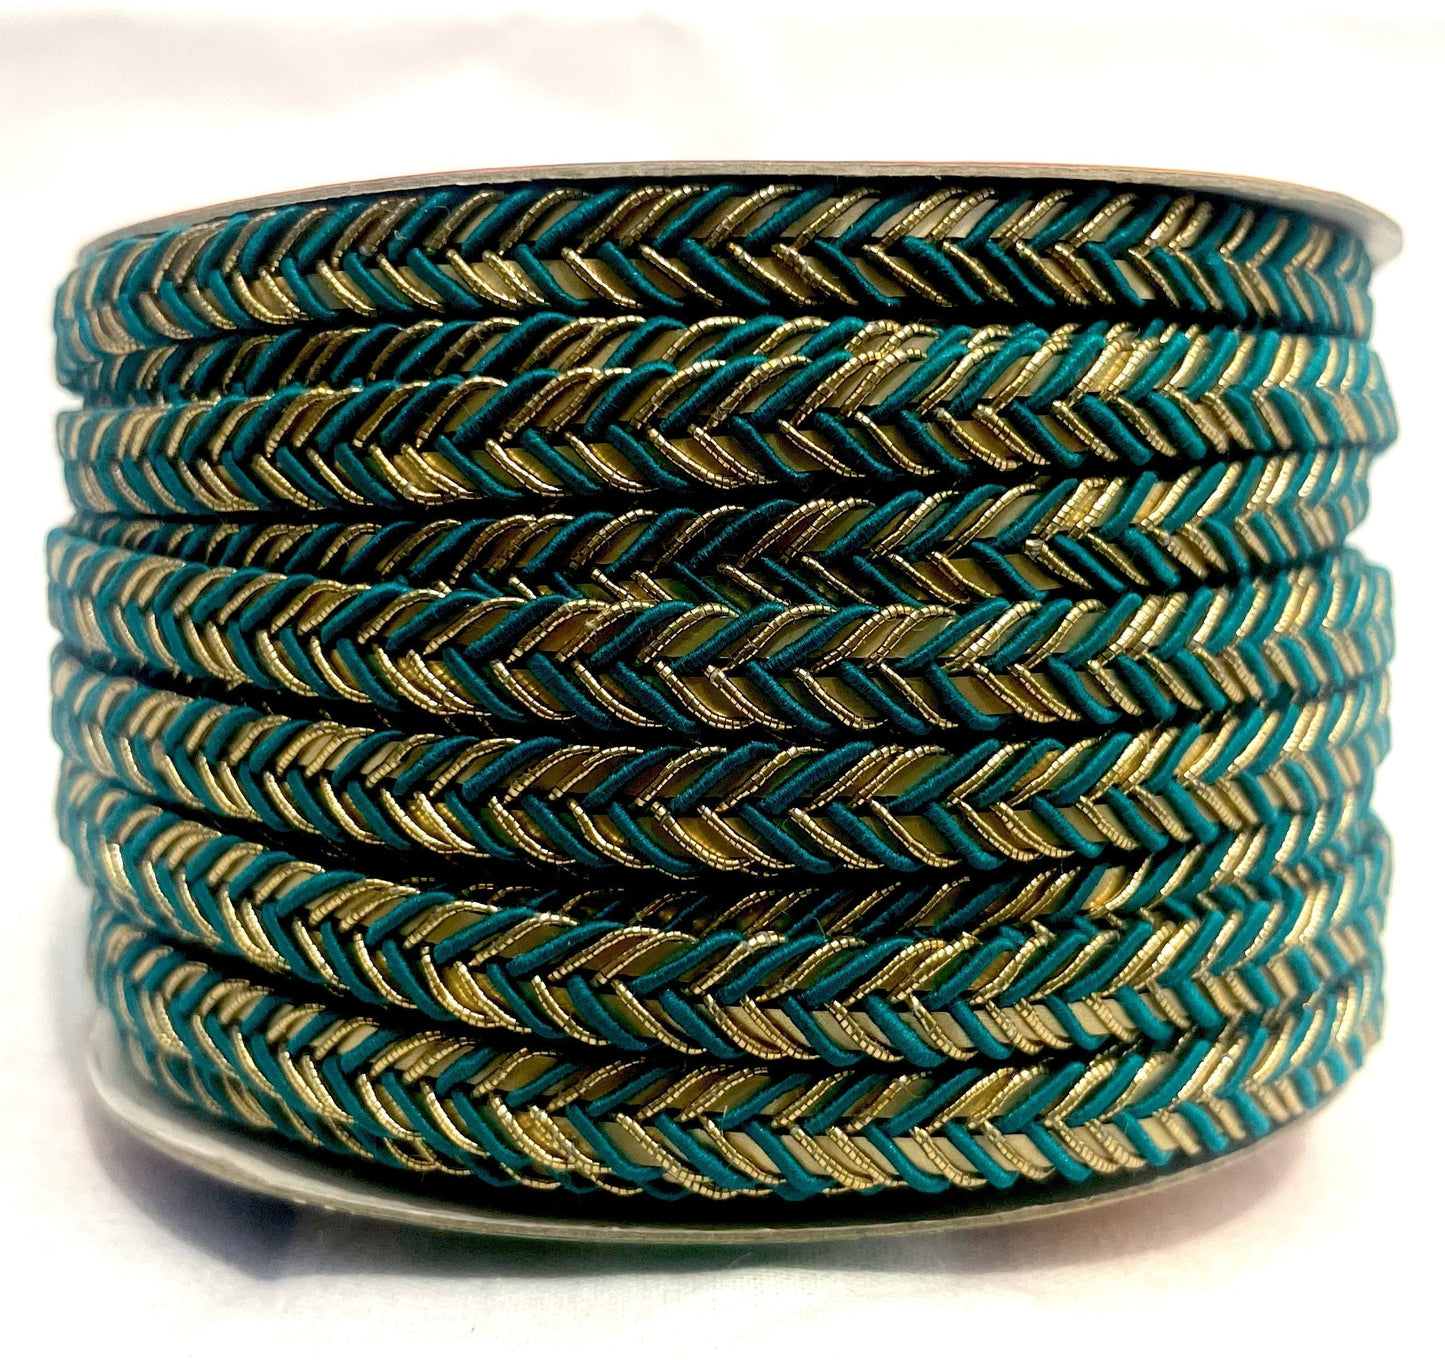 Golden Braid Border, Dark Green And Golden,  Laces for Dress, Home Décor, Shoe, Bags, Hats, DIY, Handmade, 0.2 inch Broad